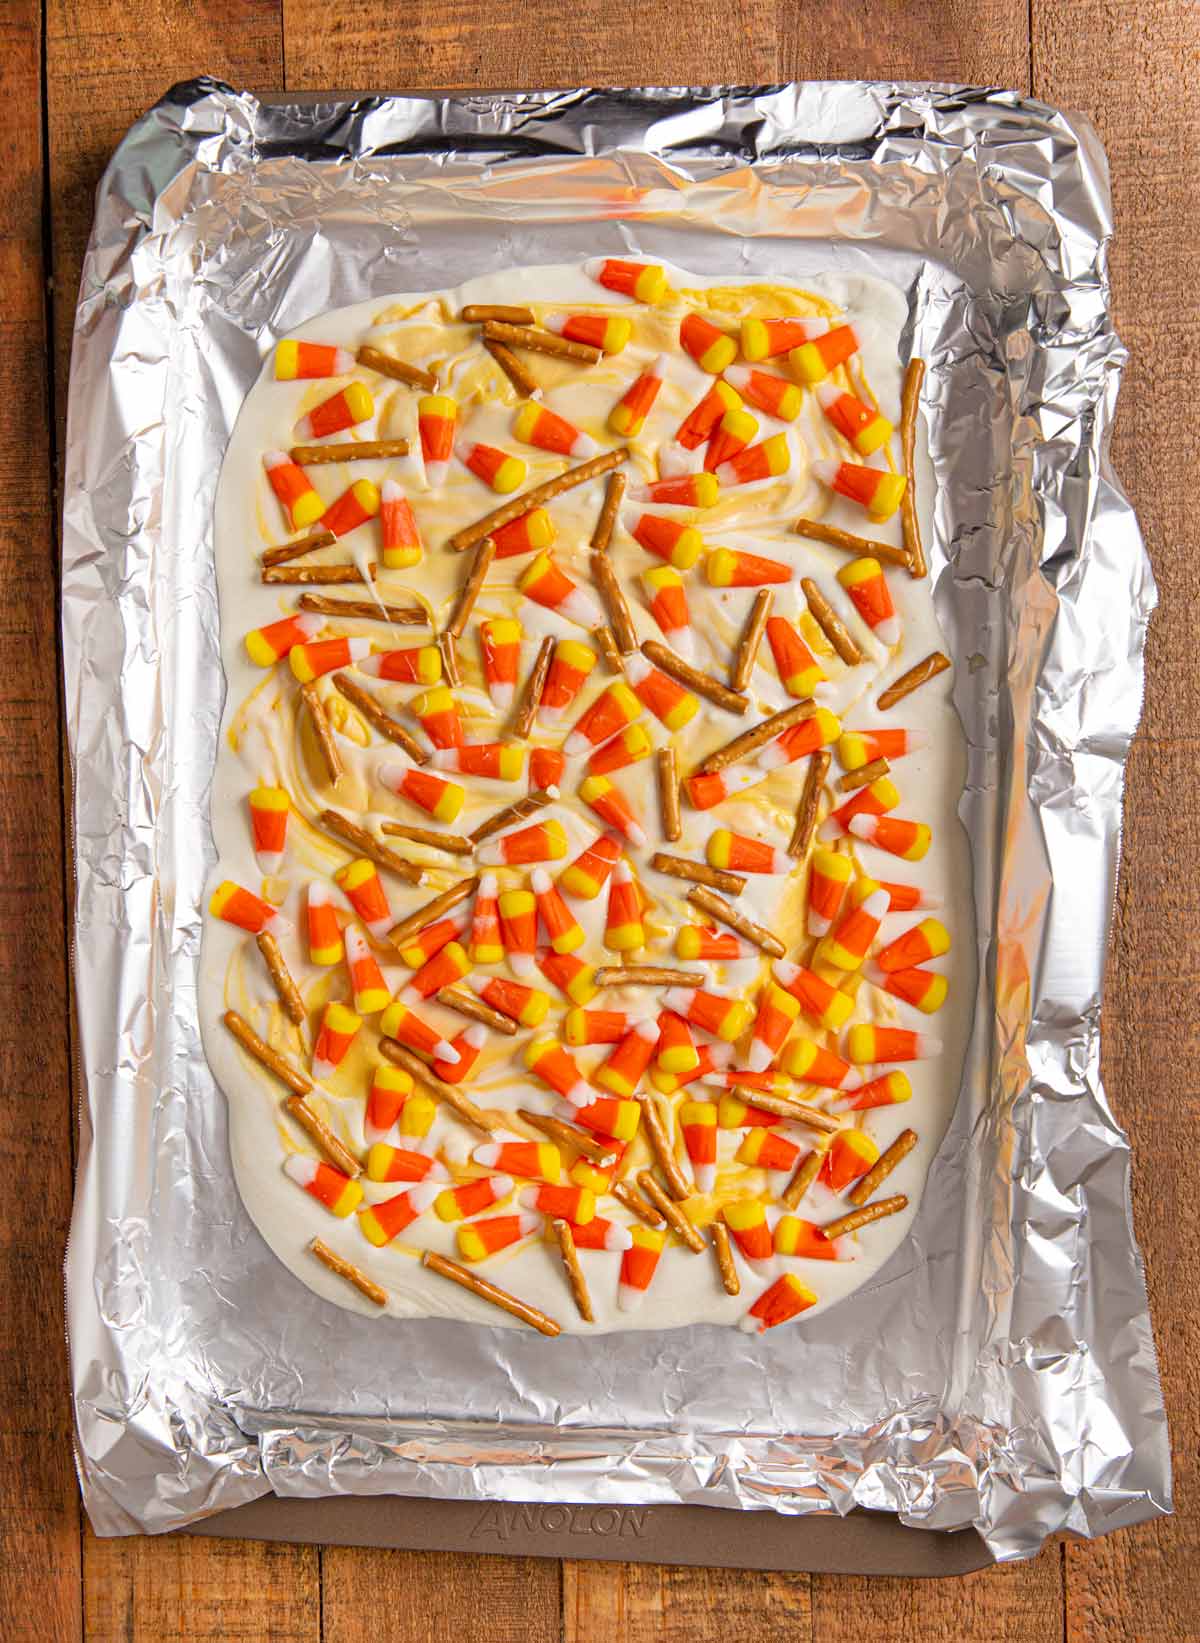 Candy Corn Bark in baking dish with foil